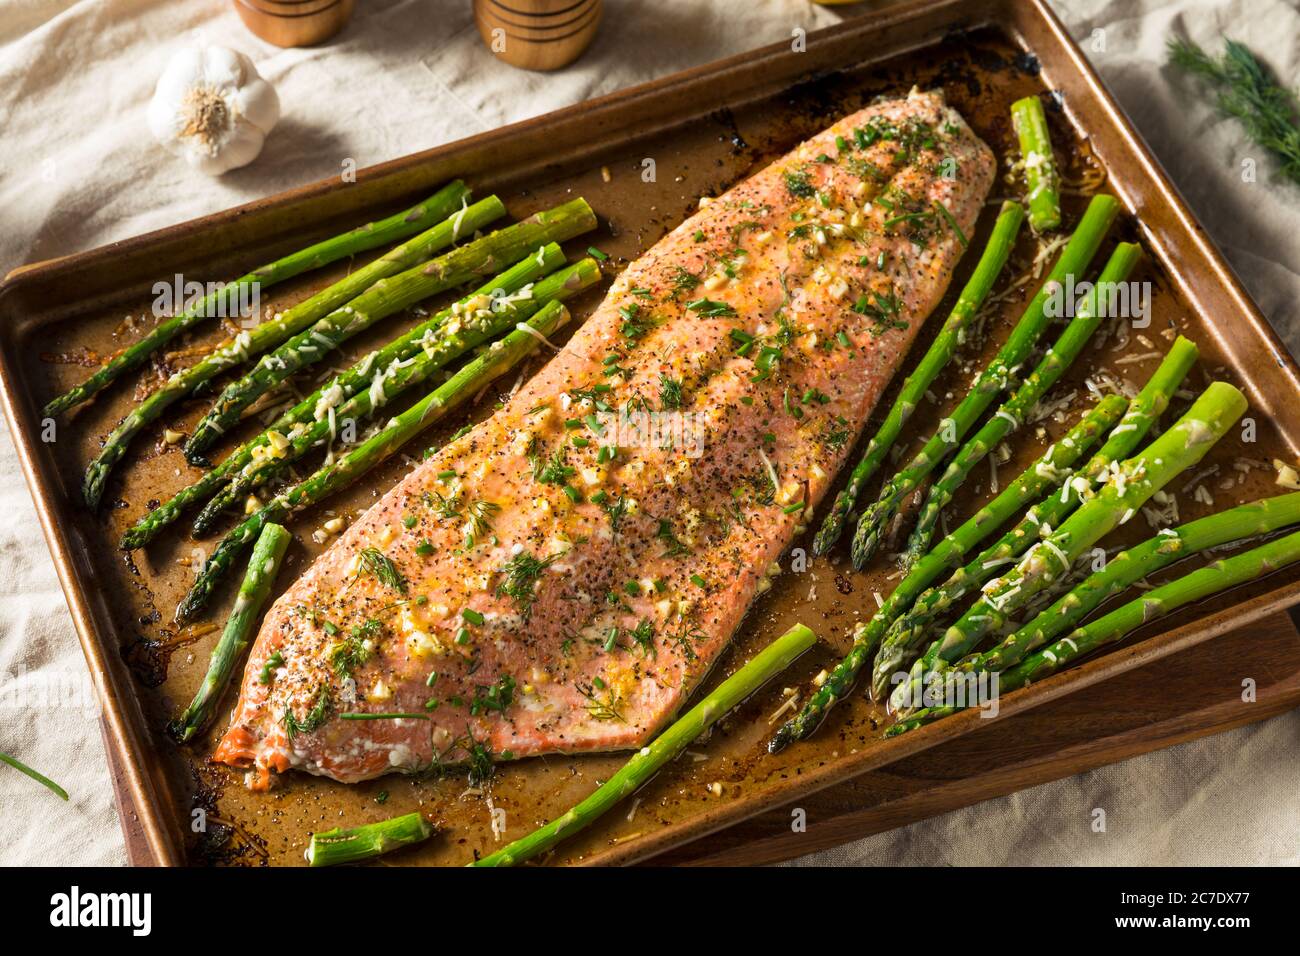 Homemade Roasted Salmon Filet and Asparagus with Garlic and Dill Stock Photo